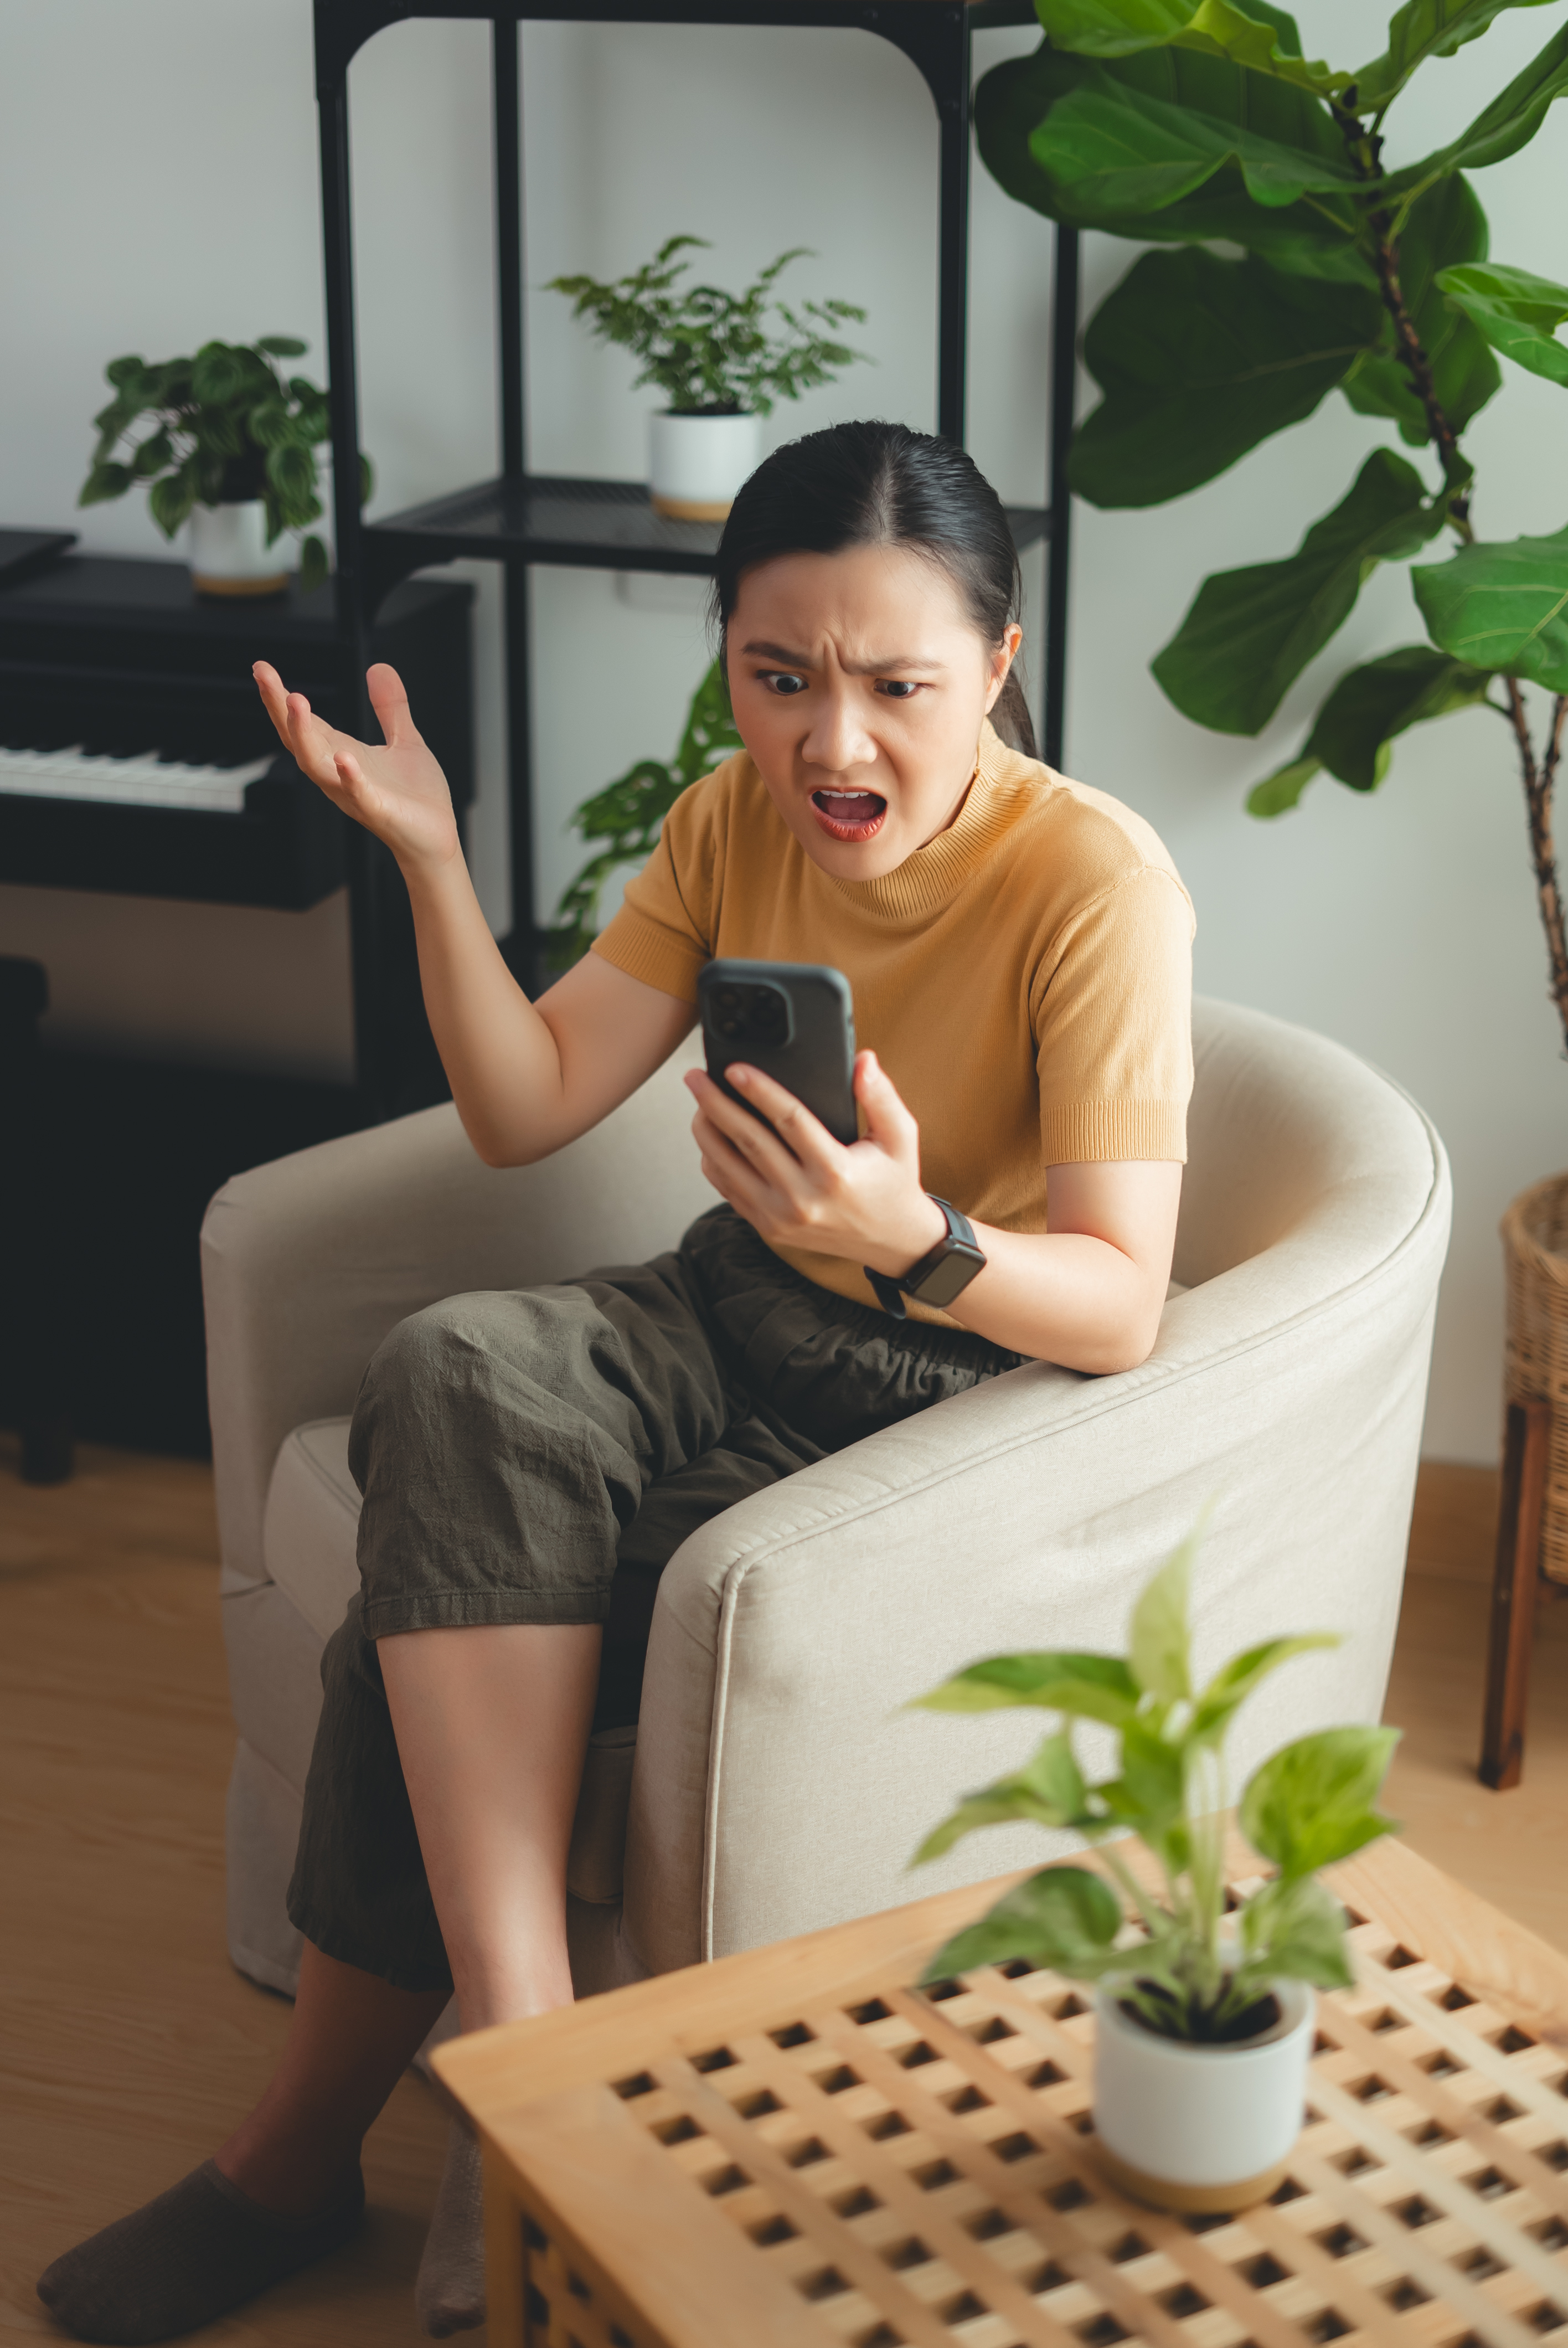 Woman looks shocked while looking at her phone in a home setting